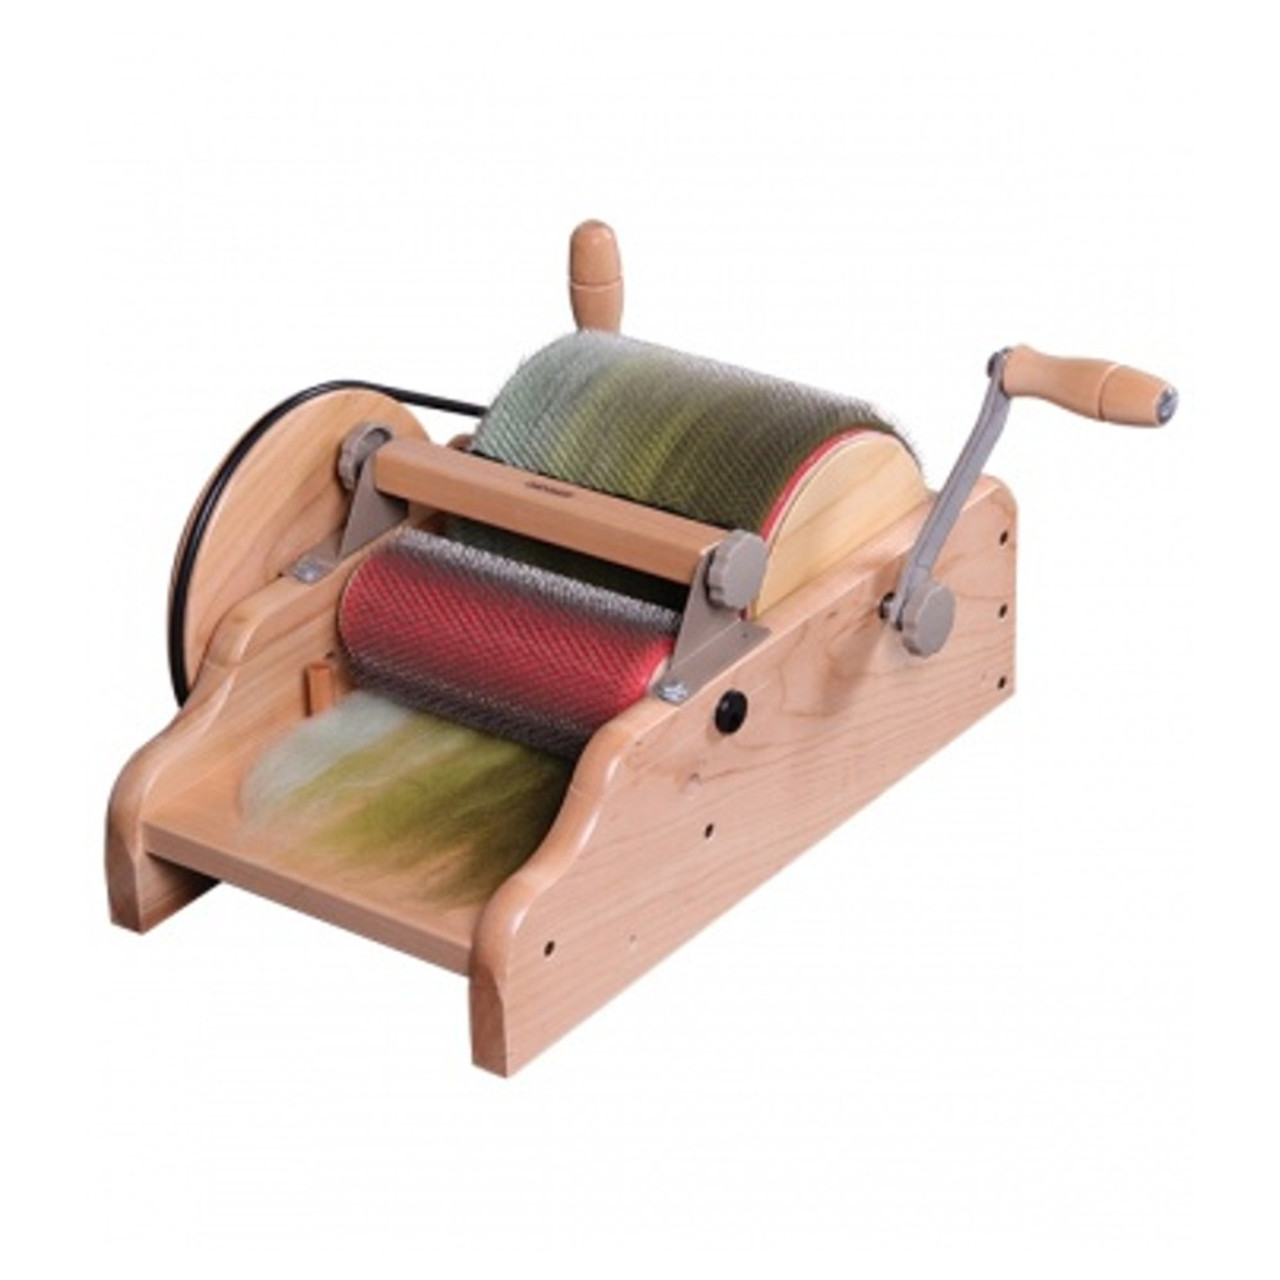 wool carder products for sale